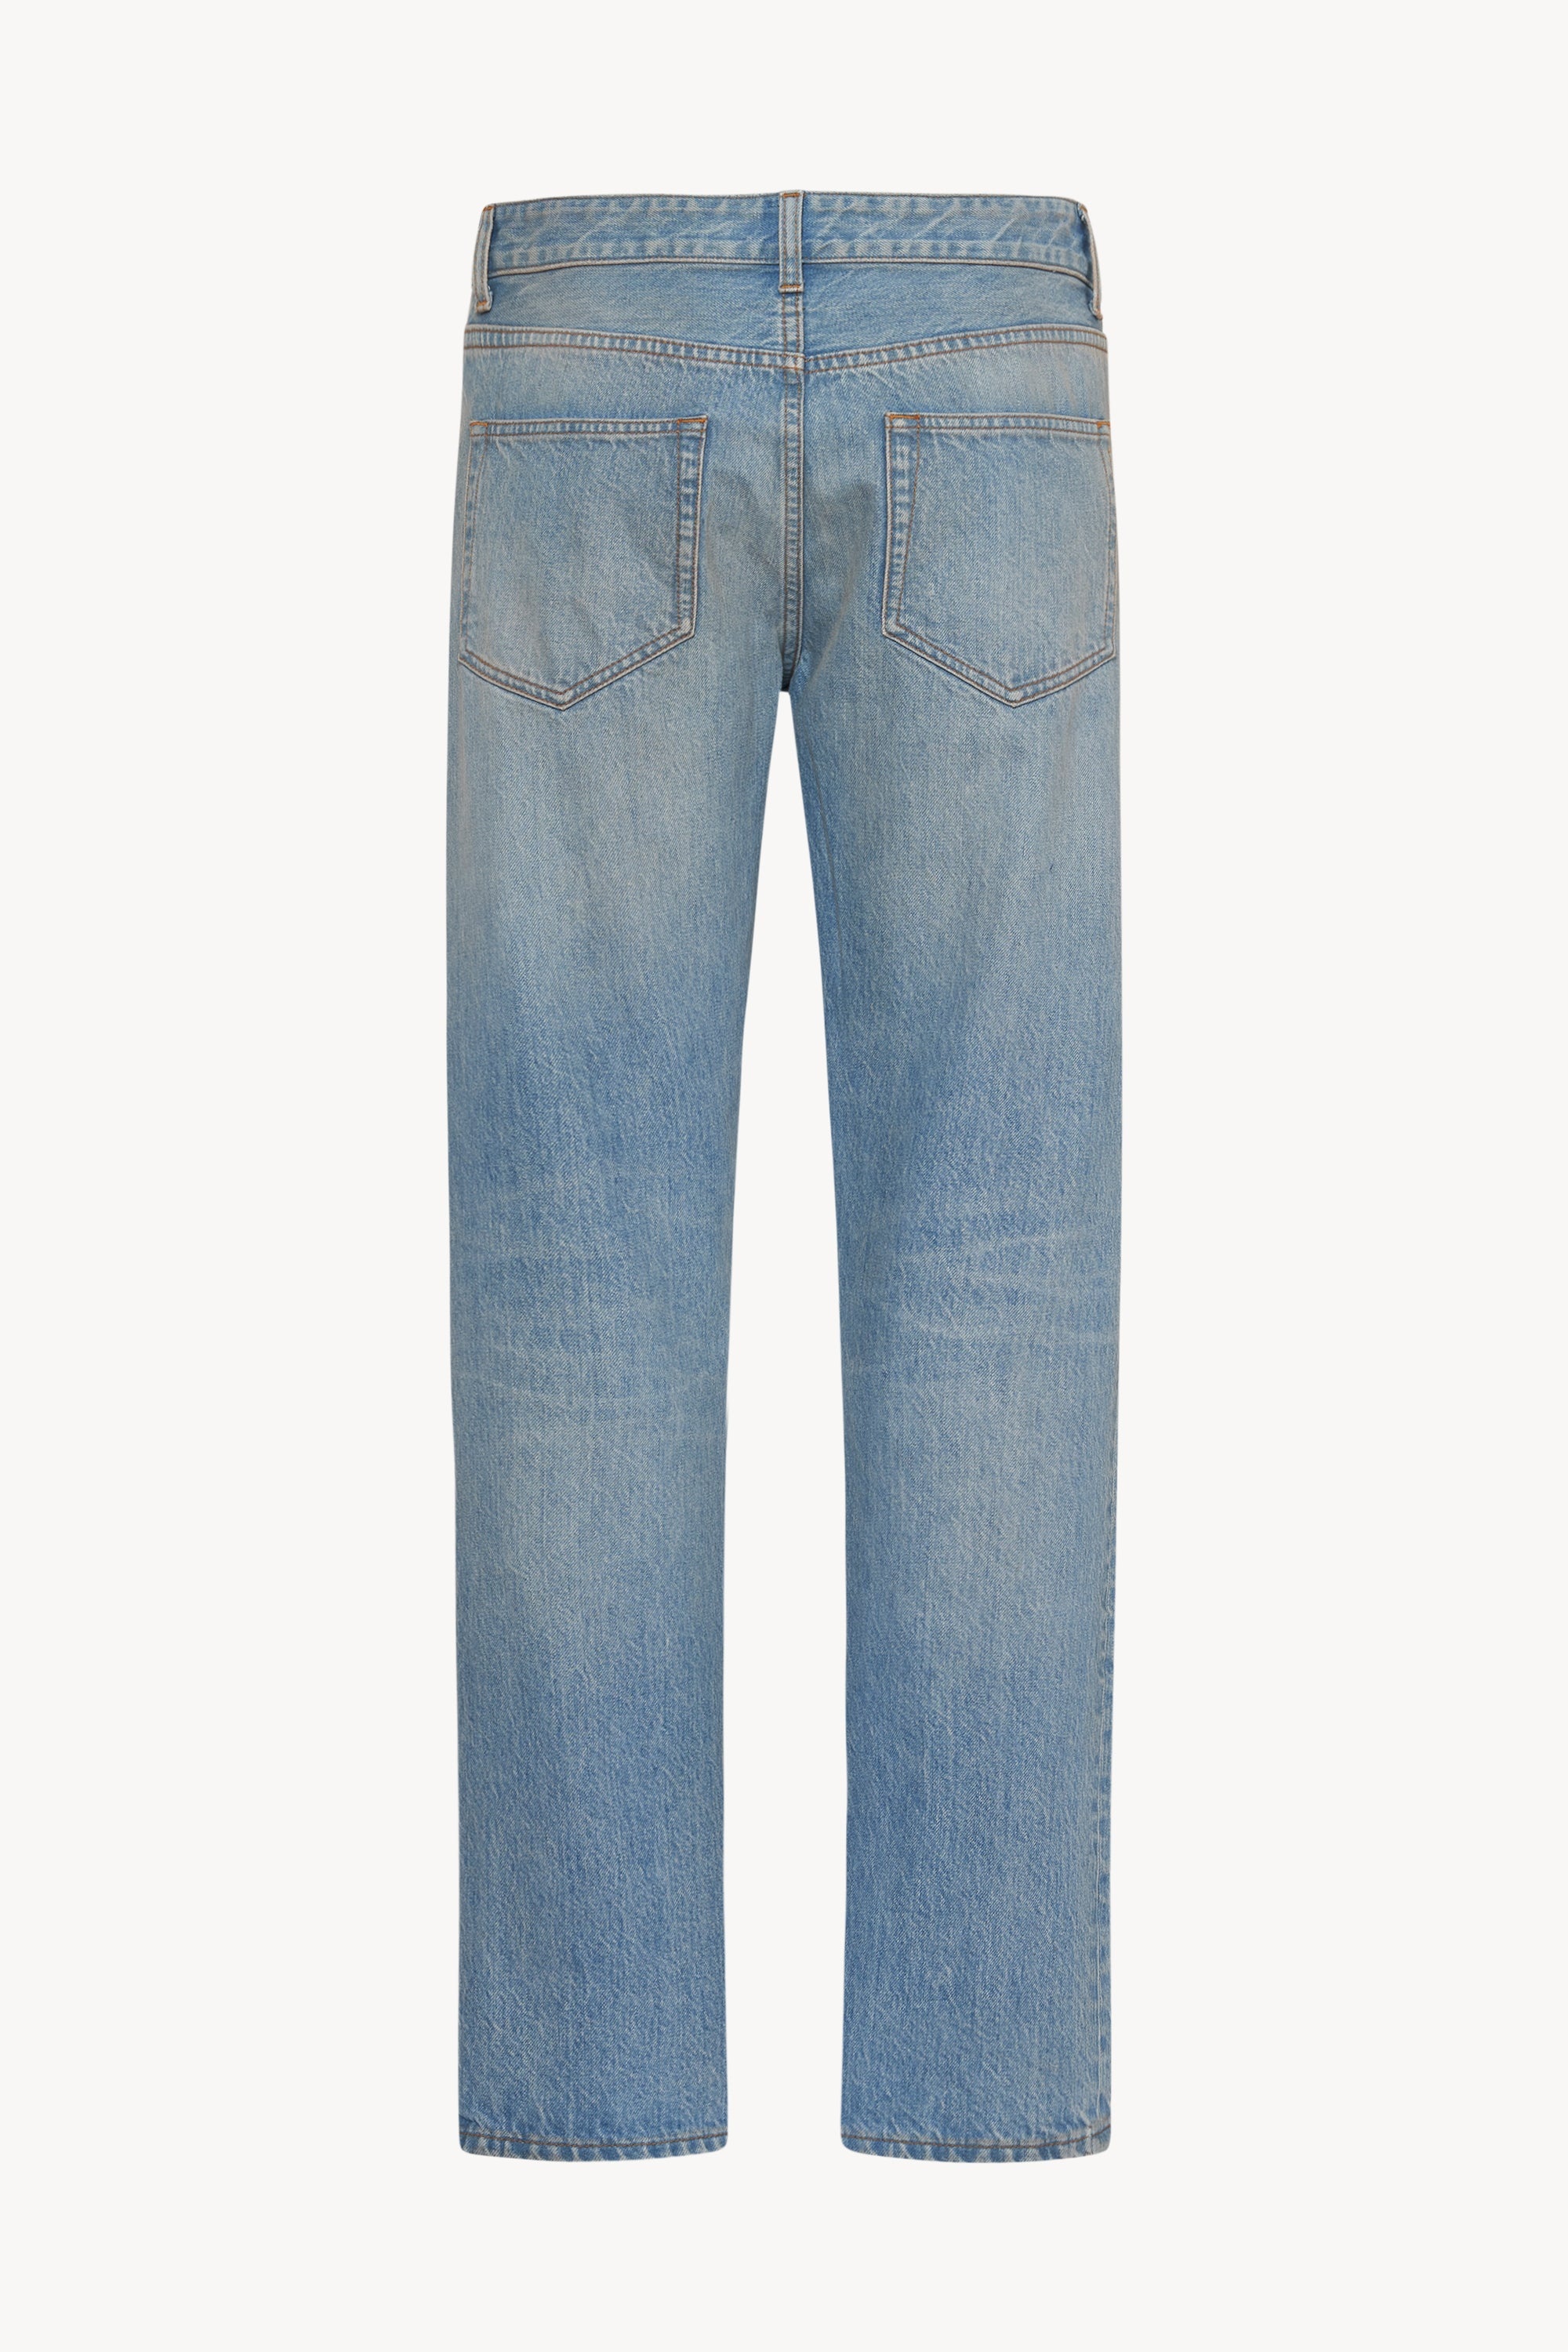 Carlisle Jeans in Cotton - 2